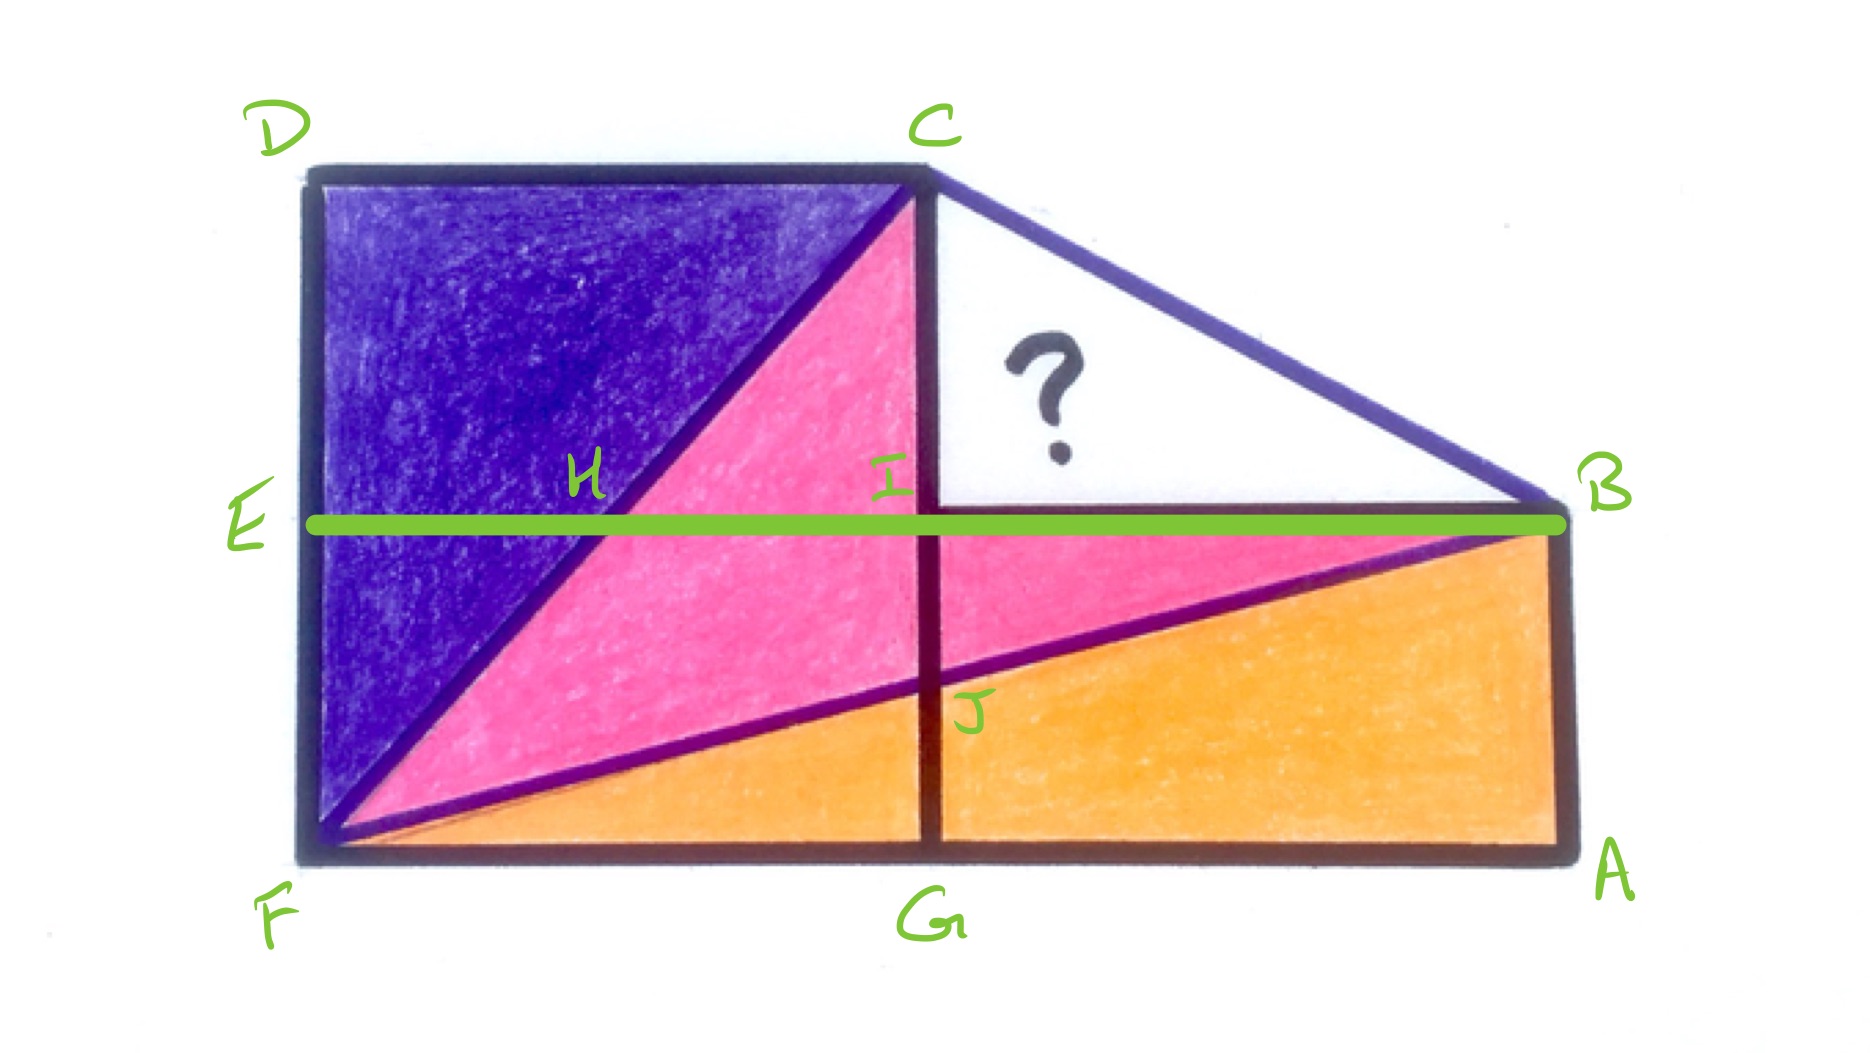 Triangle over two rectangles dissection